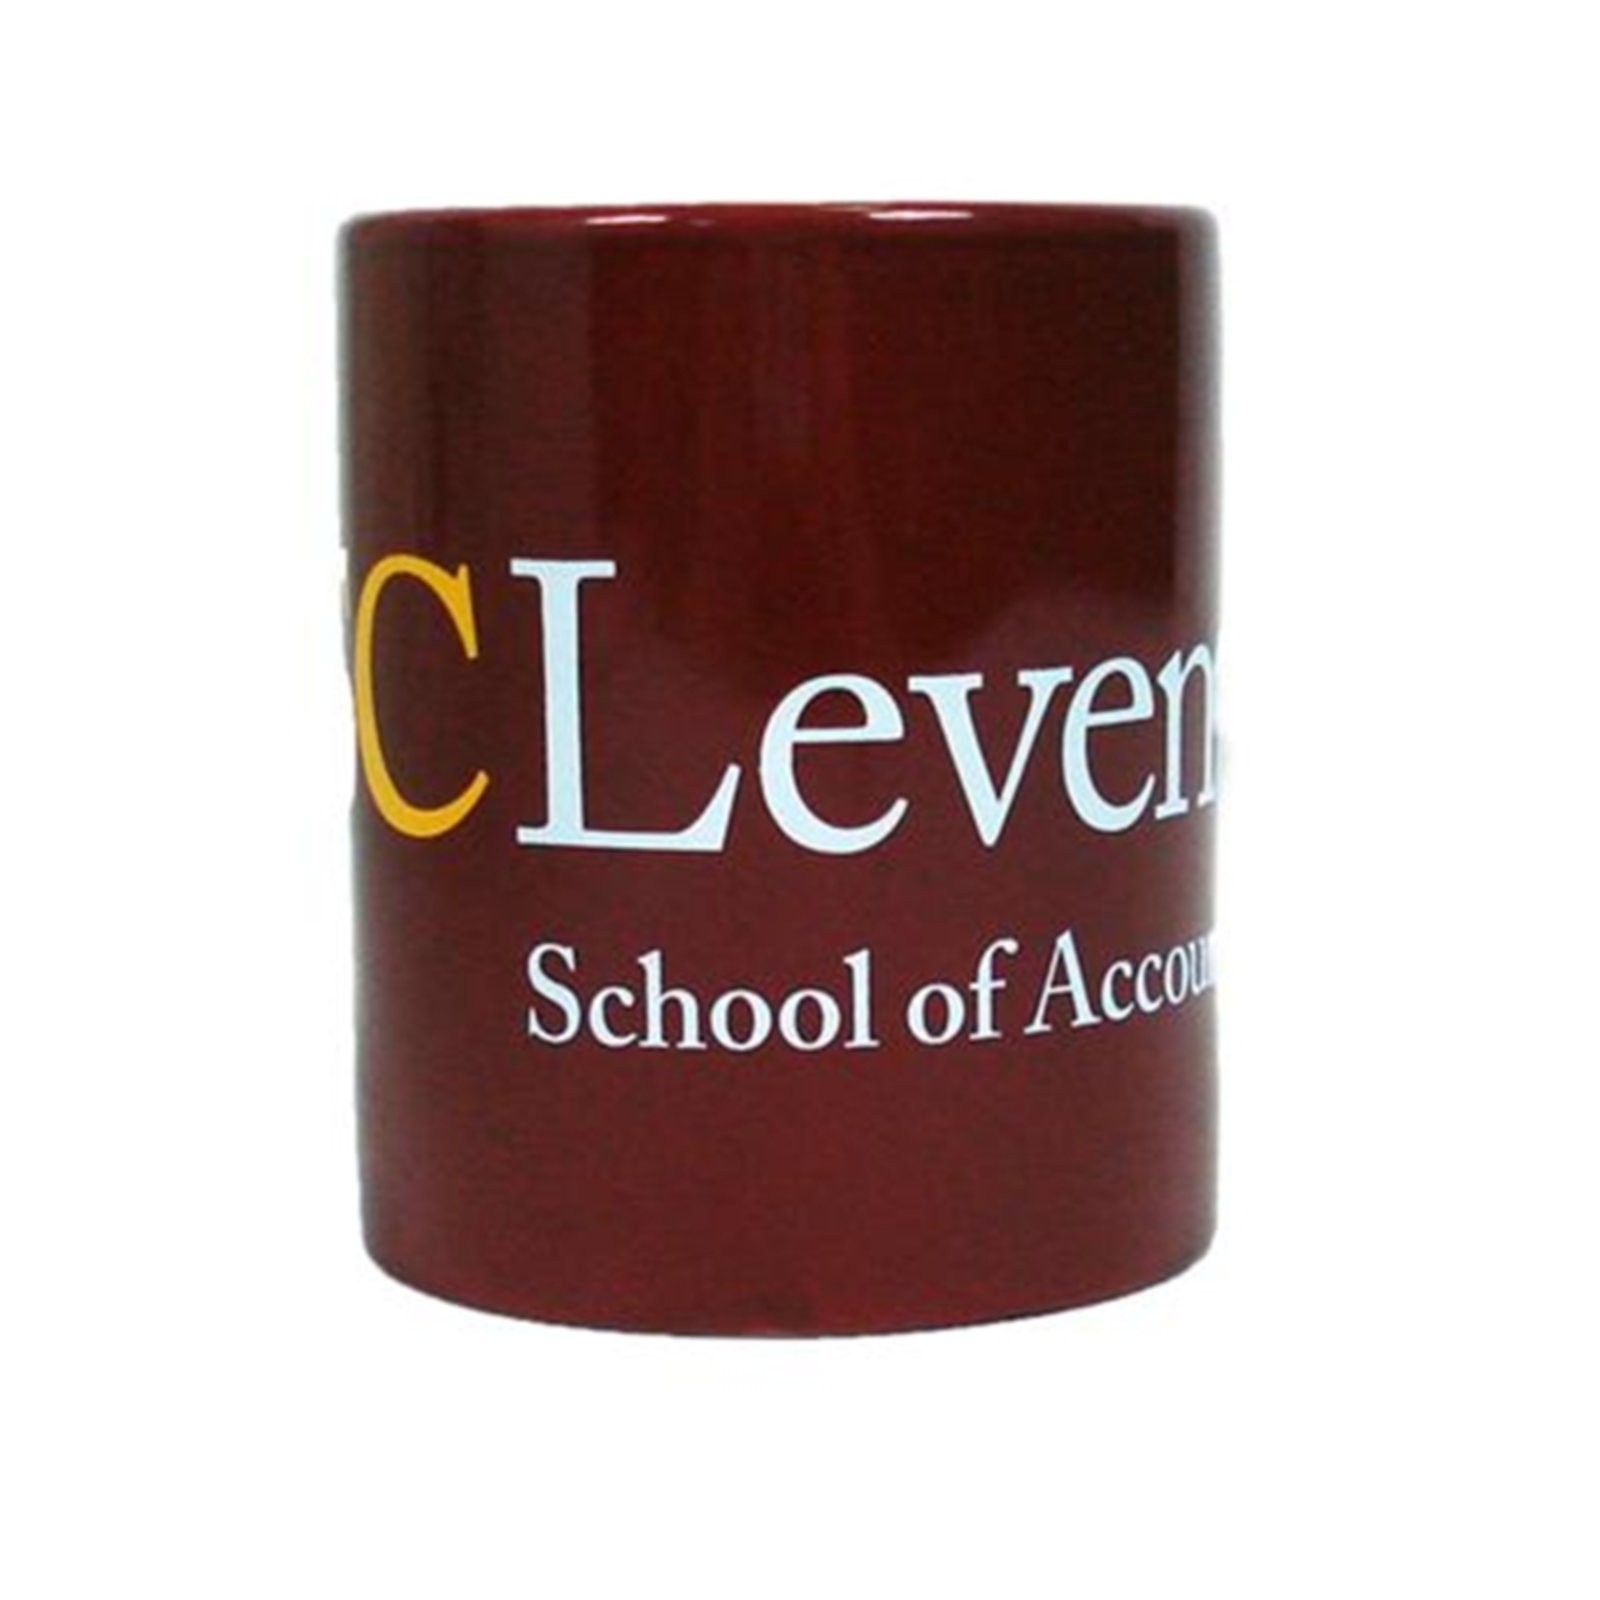 USC School of Leventhal Coffee Mug By R&D Specialty Company image01